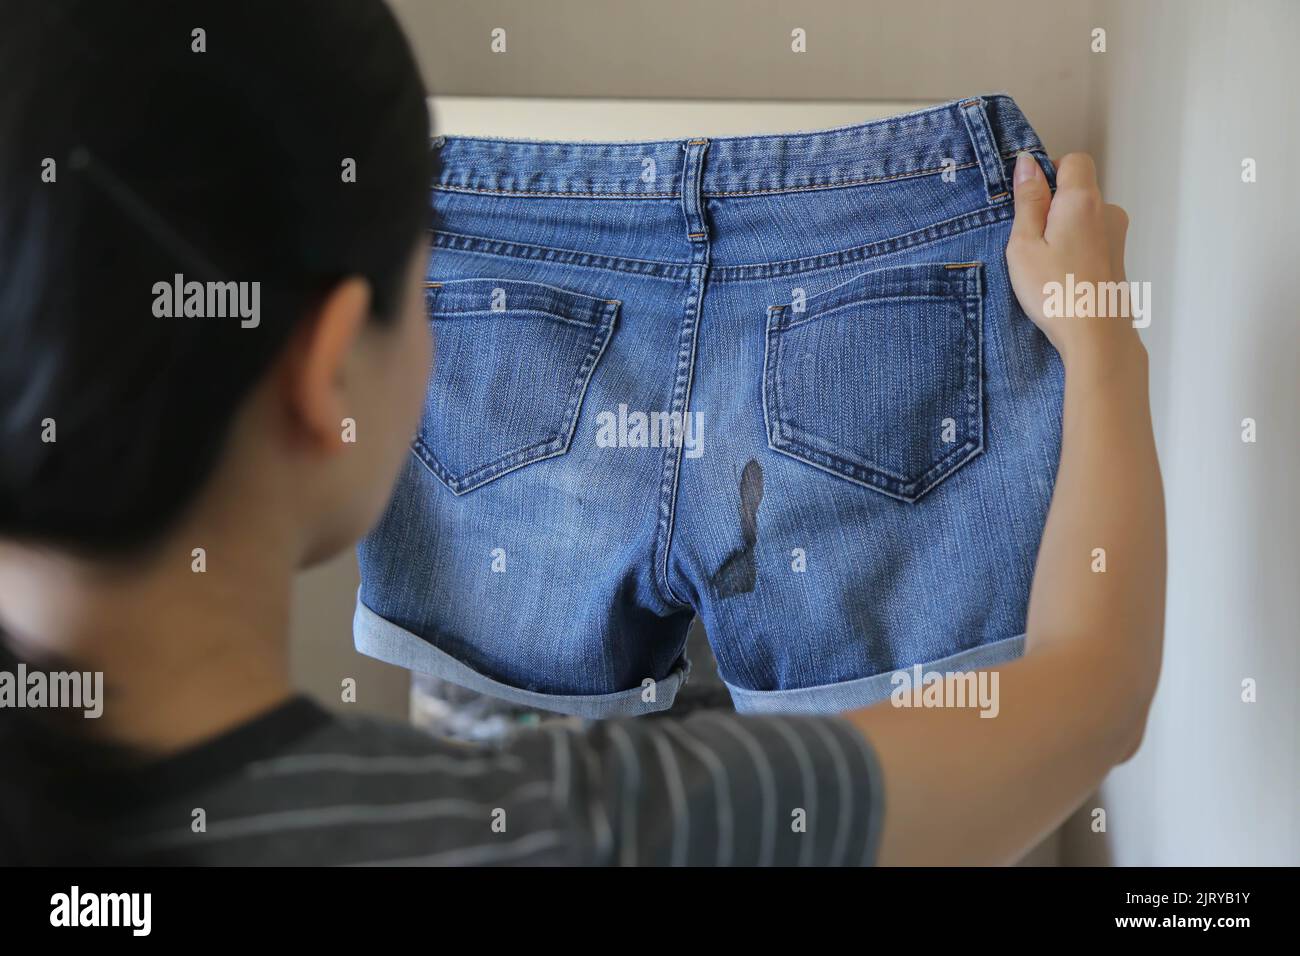 https://c8.alamy.com/comp/2JRYB1Y/women-hold-short-pants-with-period-blood-spot-stains-on-blur-background-need-to-be-cleaned-2JRYB1Y.jpg